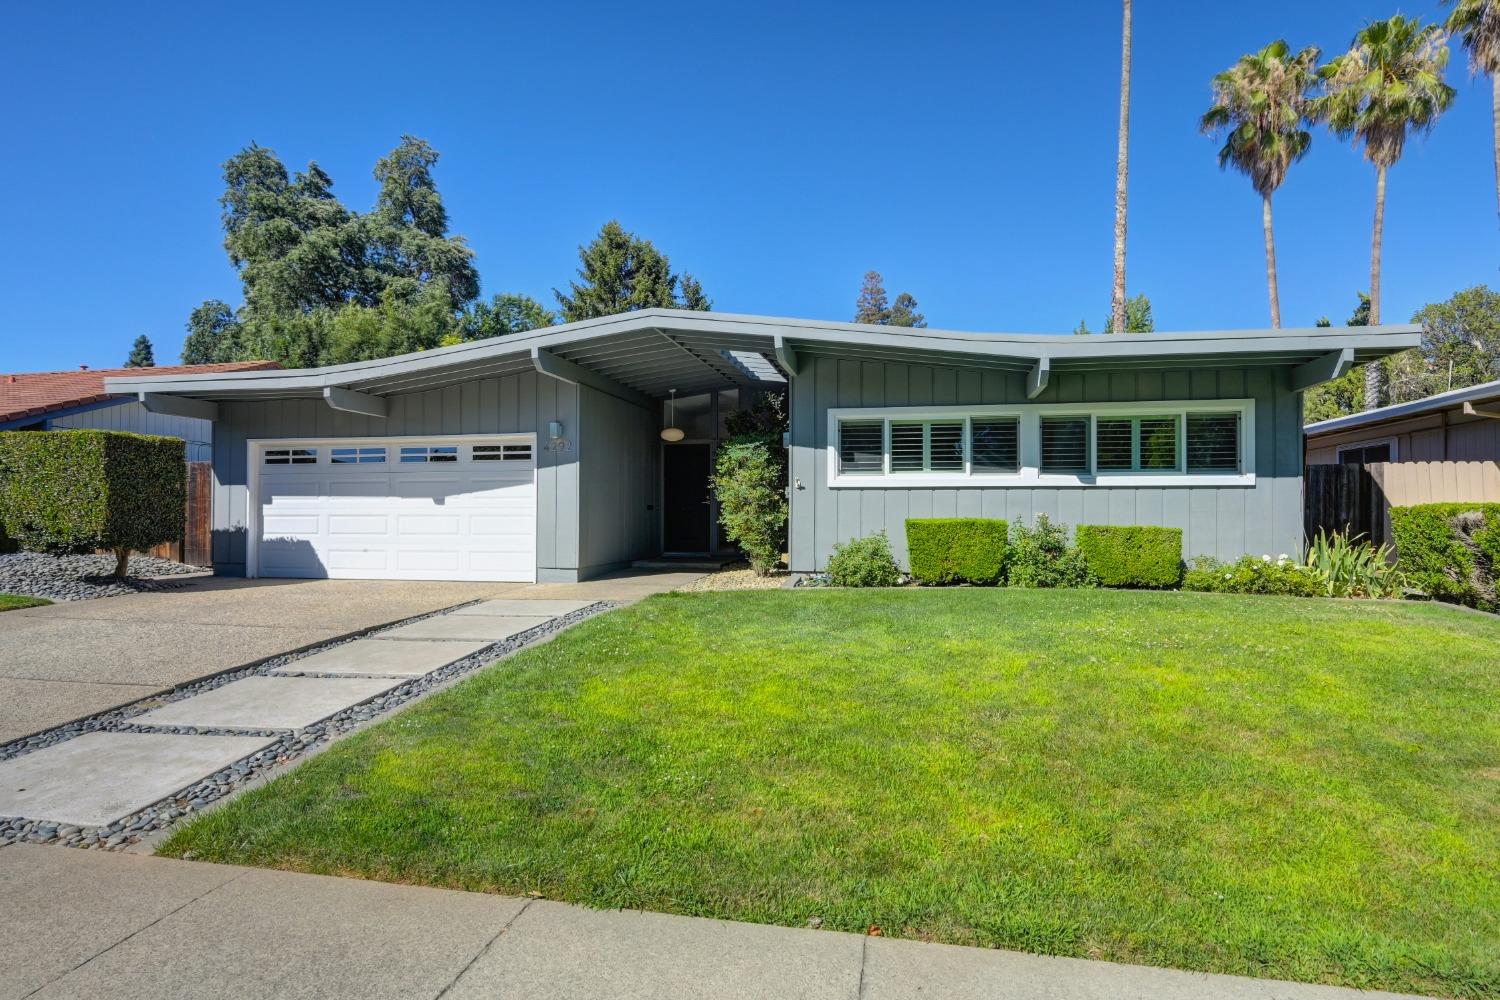 Mid Century Modern, Eichler, Contemporary and Modern homes for sale in Sacramento, Carmichael, Fair Oaks, Davis and the greater metro area